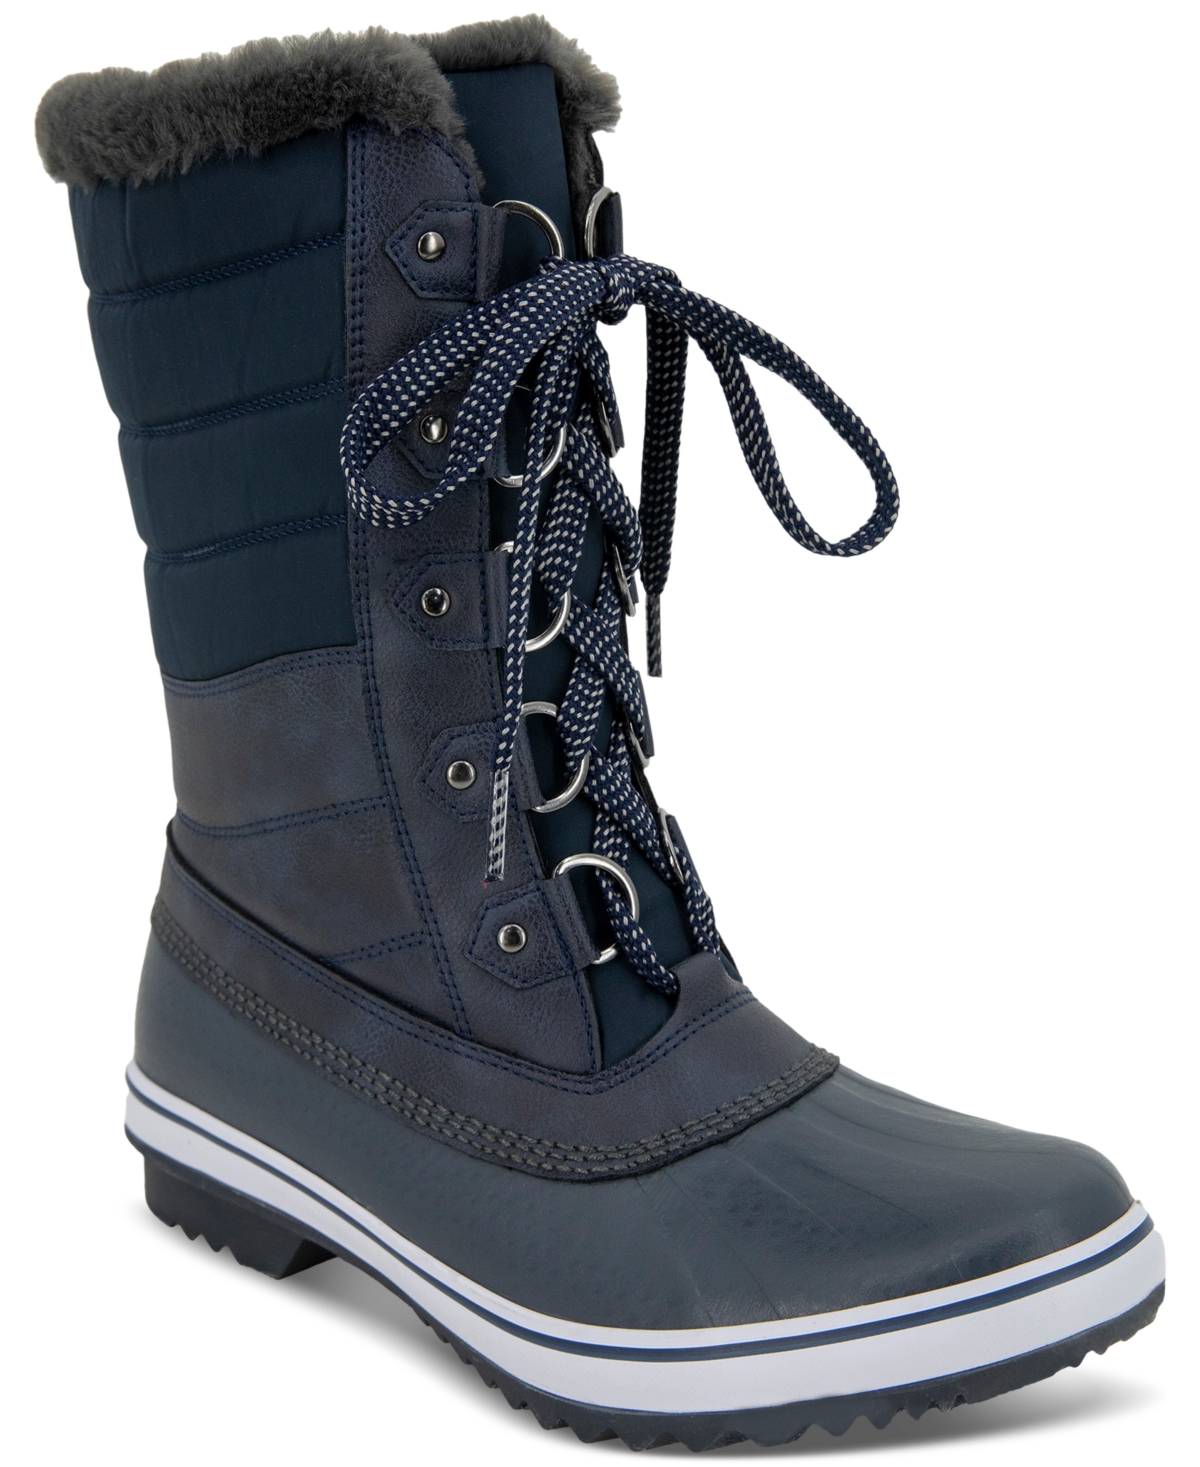 Women's Siberia Waterproof Lace-Up Quilted Cold-Weather Boots - Navy